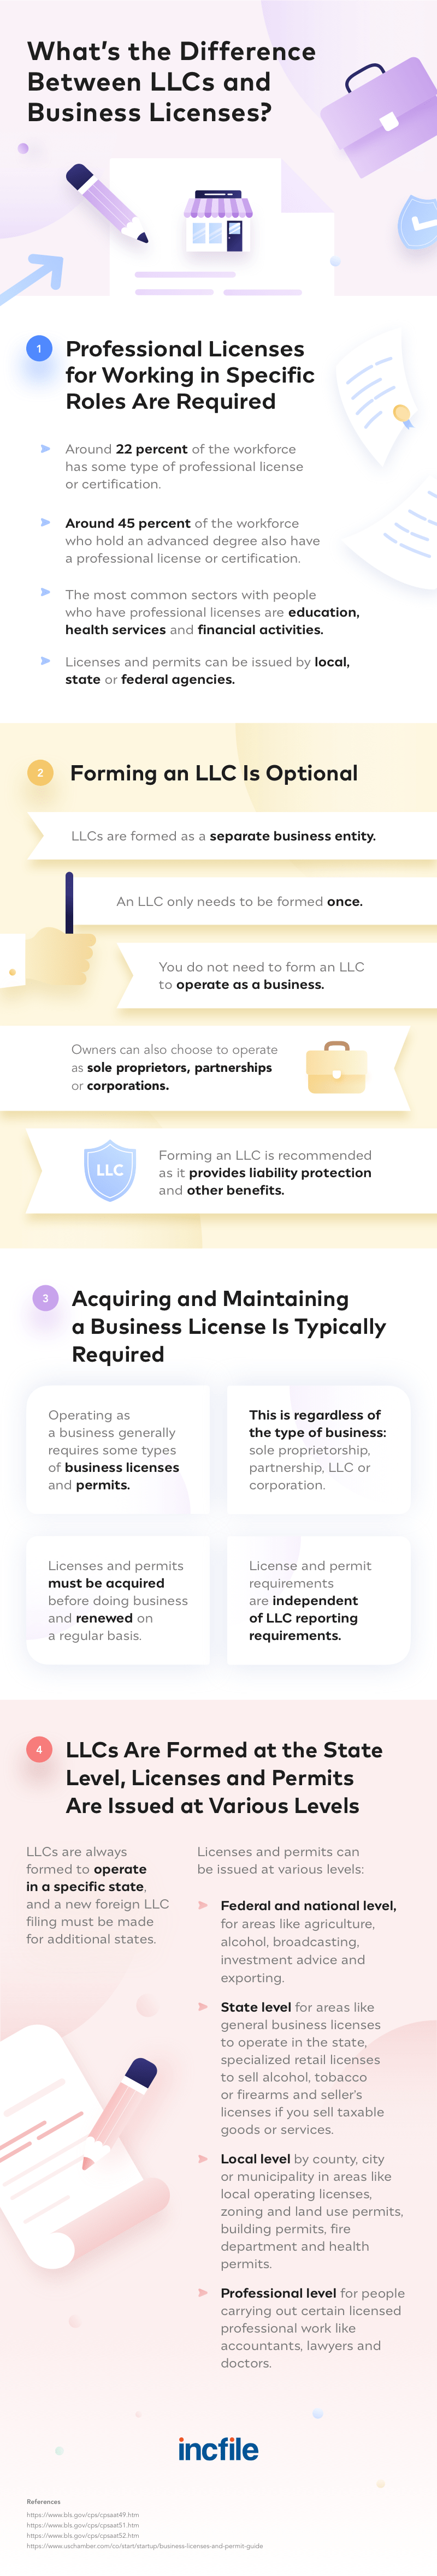 difference between LLCs and business licenses